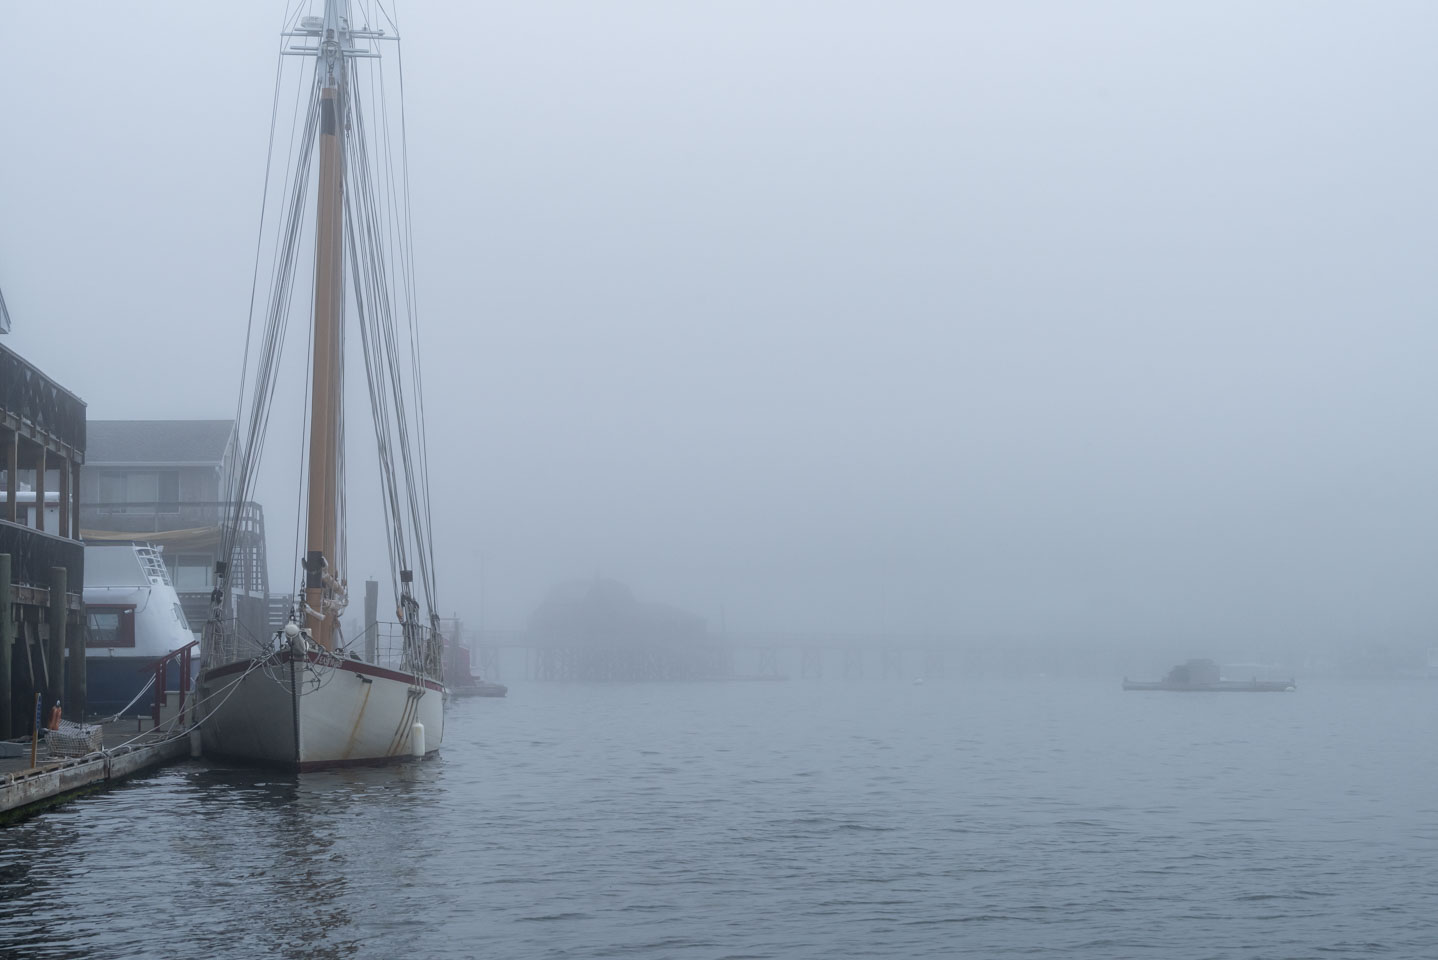 Sailboat in Boothbay Harbor with fog in the background